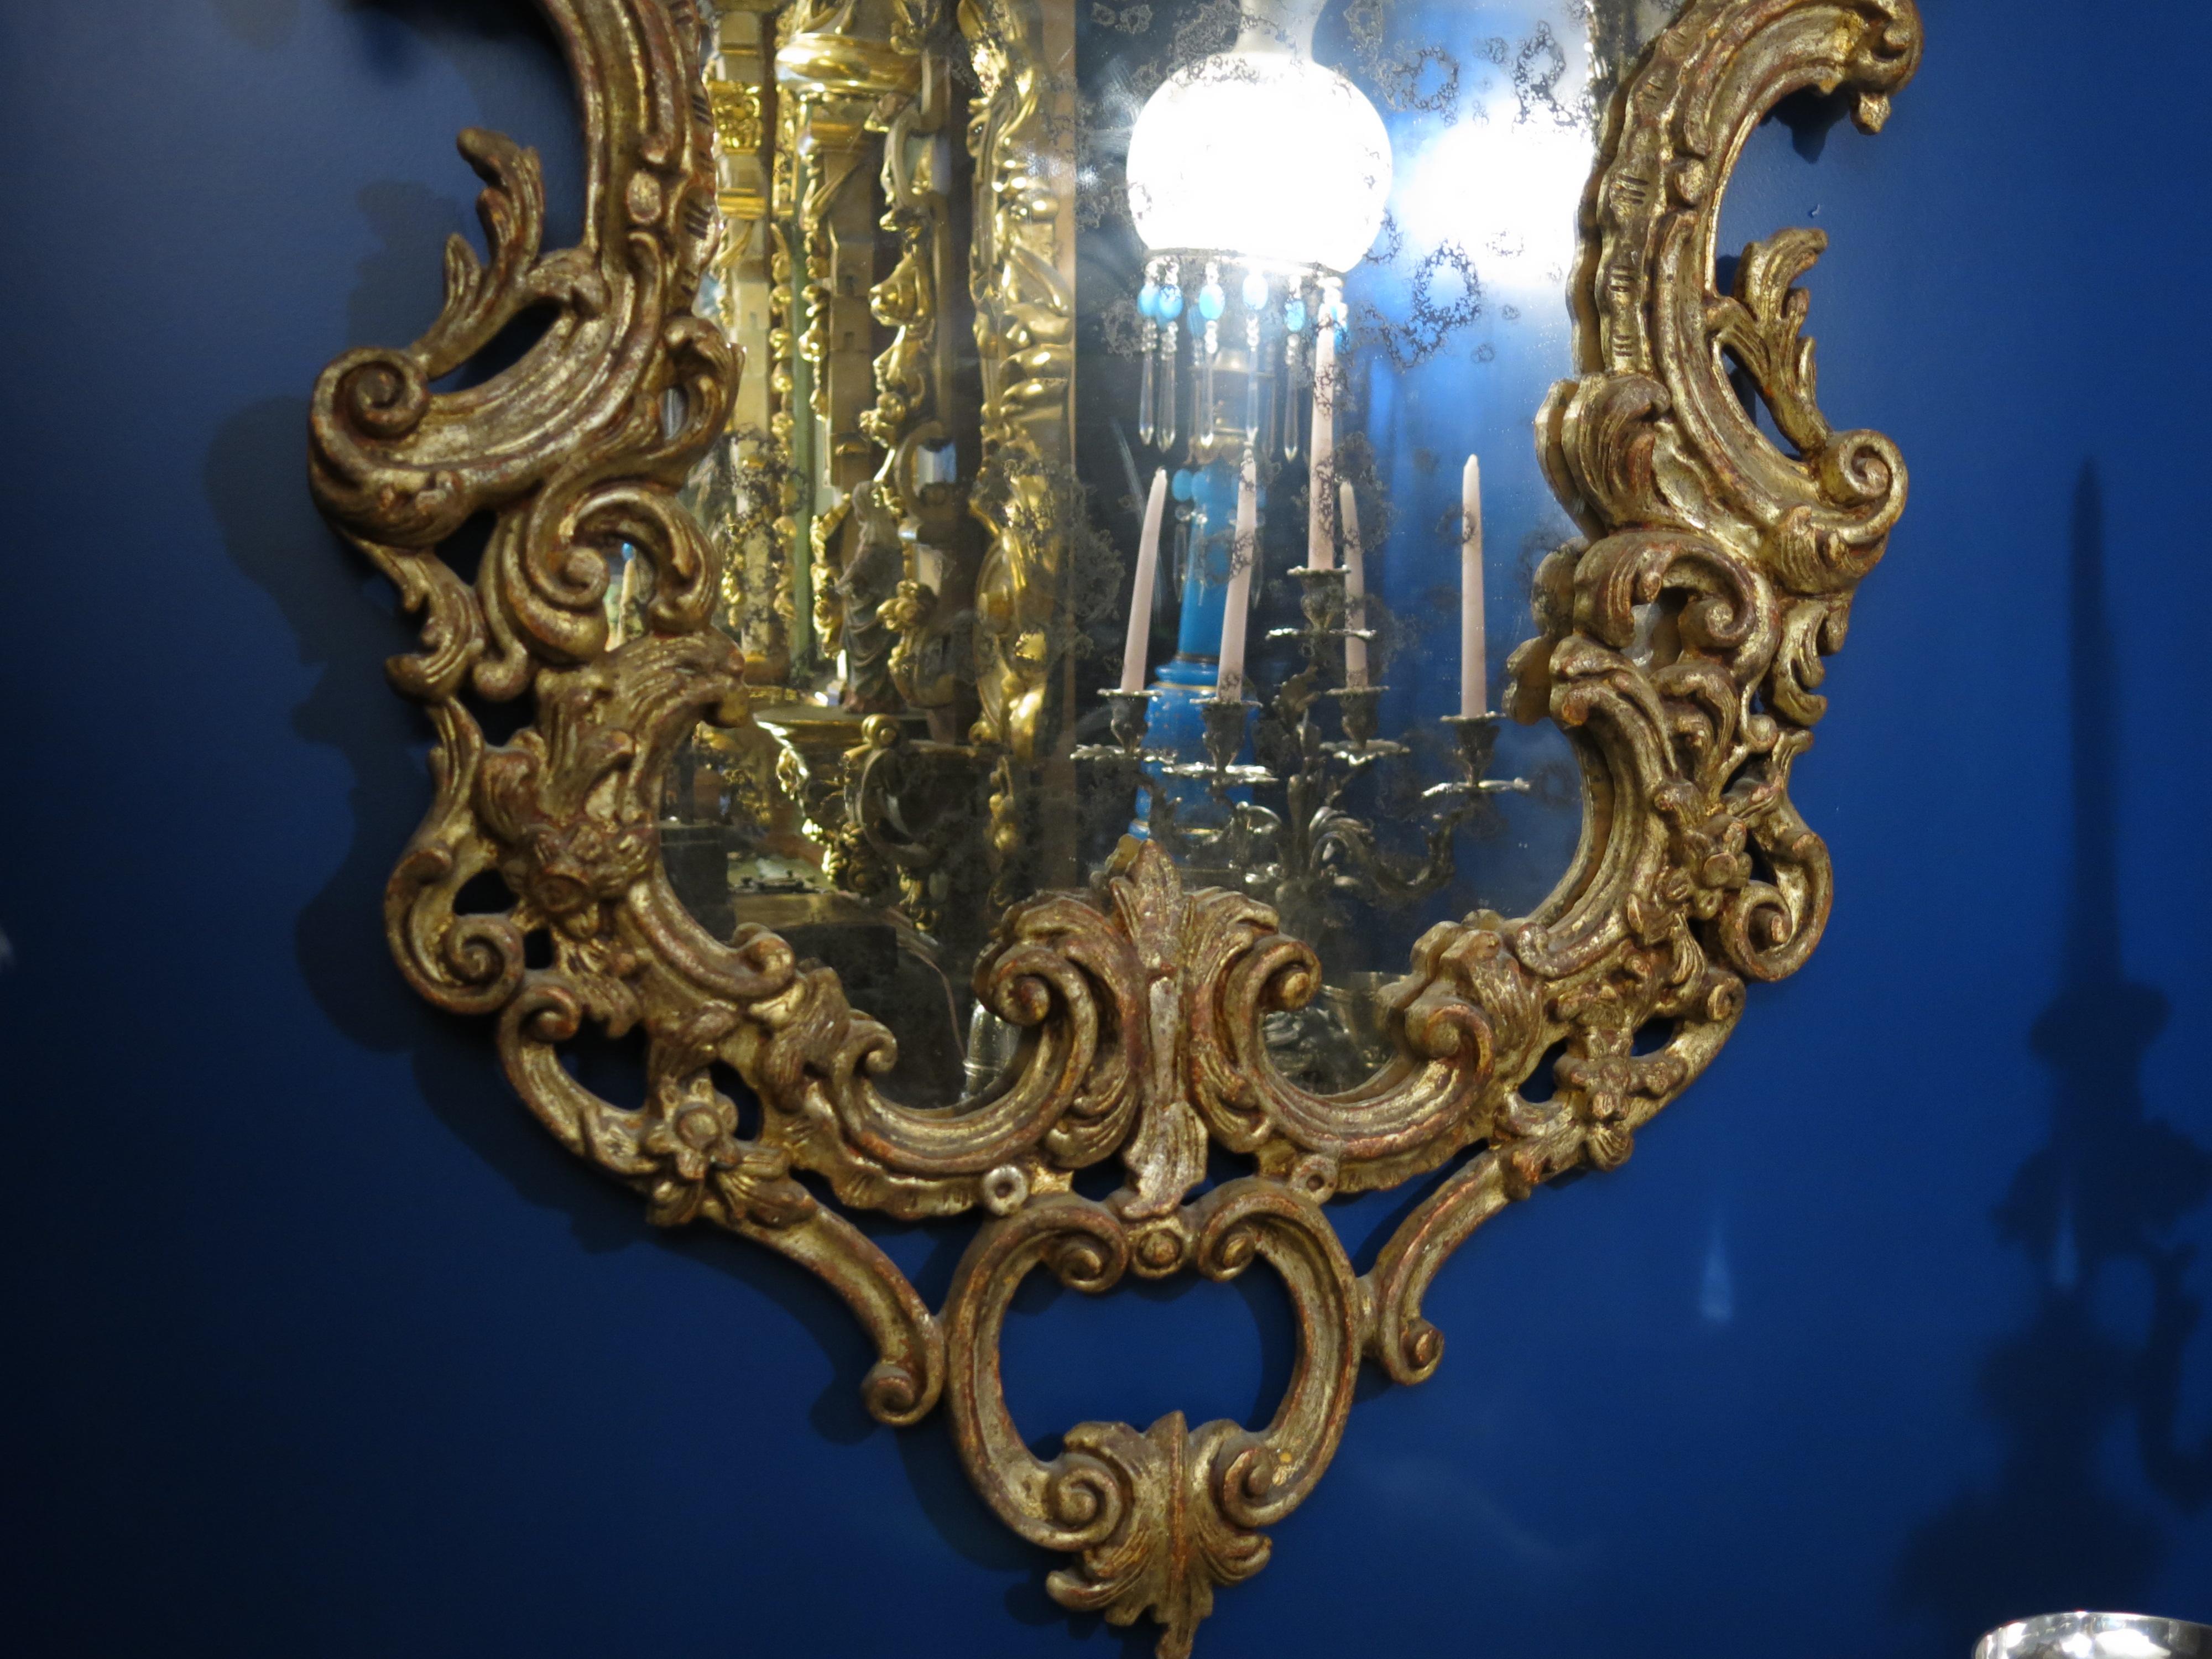 Indulge in the timeless allure of Venetian craftsmanship with this magnificent antique Venetian mirror. Crafted from gilt wood with a striking baroque influence, it exudes opulence and grandeur, capturing the essence of Venetian elegance. In